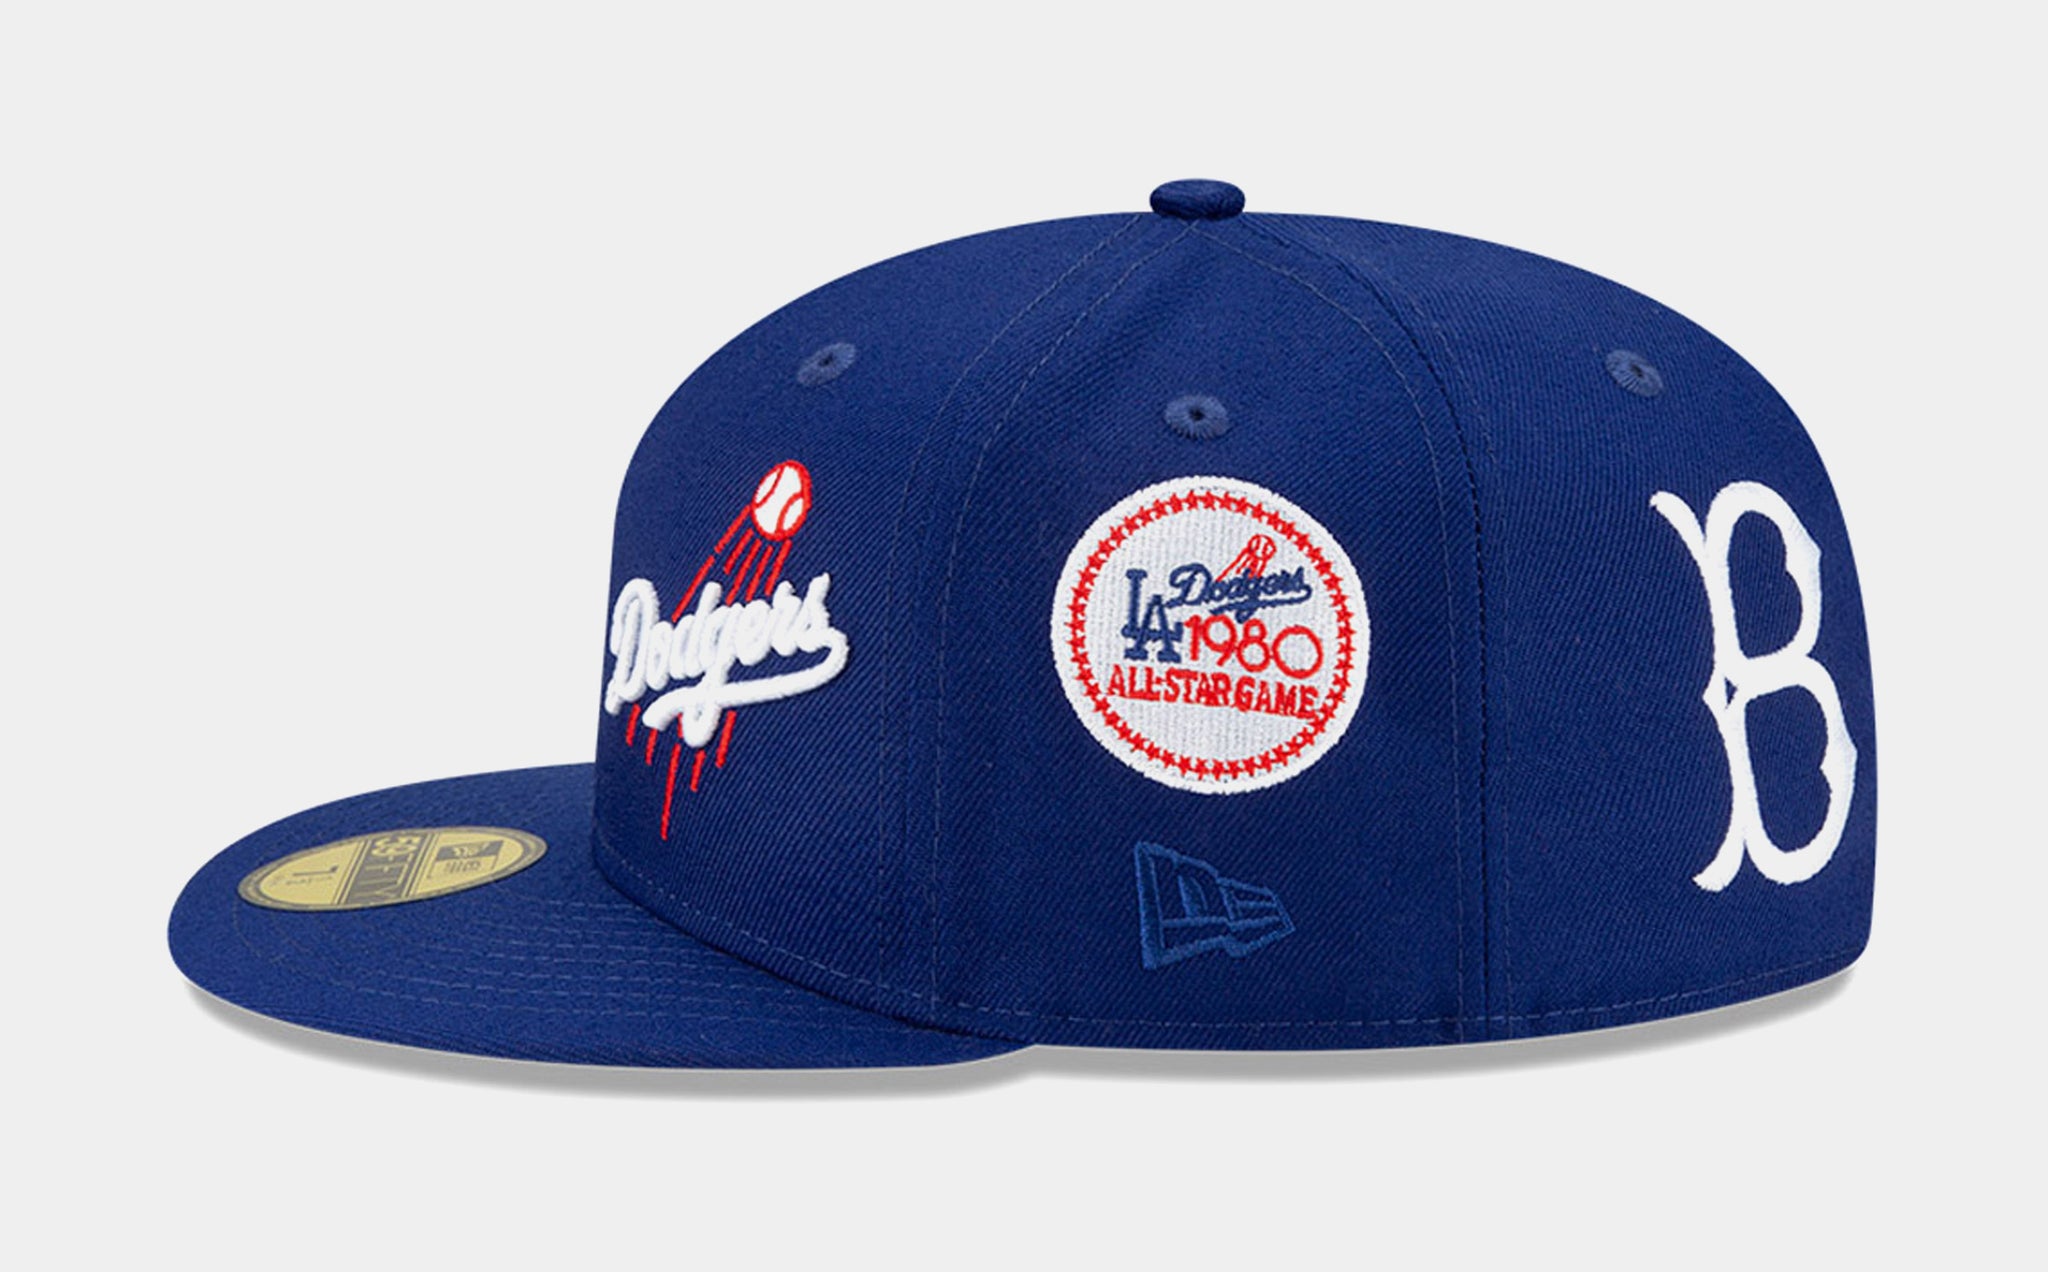 Los Angeles Dodgers All-Star Game MLB Fan Cap, Hats for sale